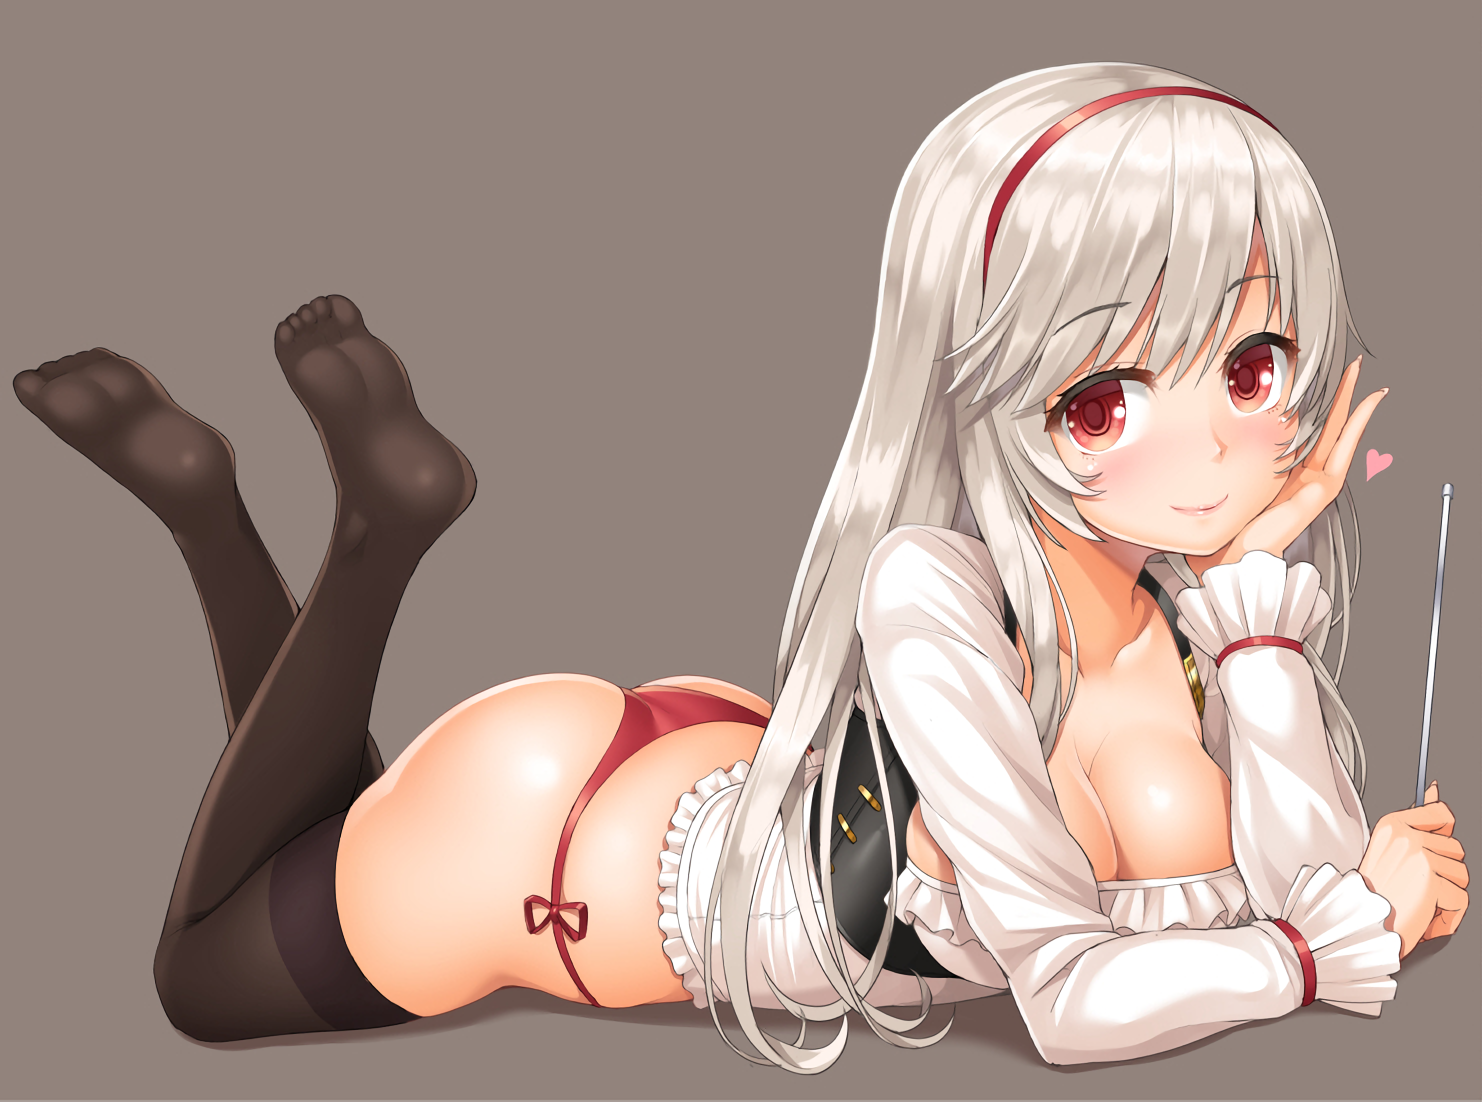 Anime 1482x1102 Sennen Sensou Aigis cleavage corset underwear thigh-highs feet stockings lying on front artwork looking at viewer red eyes Anna (Sennen Sensou Aigis) Lambda (artist) anime girls Pixiv anime smiling boobs big boobs red panties red lingerie lingerie black stockings simple background ass